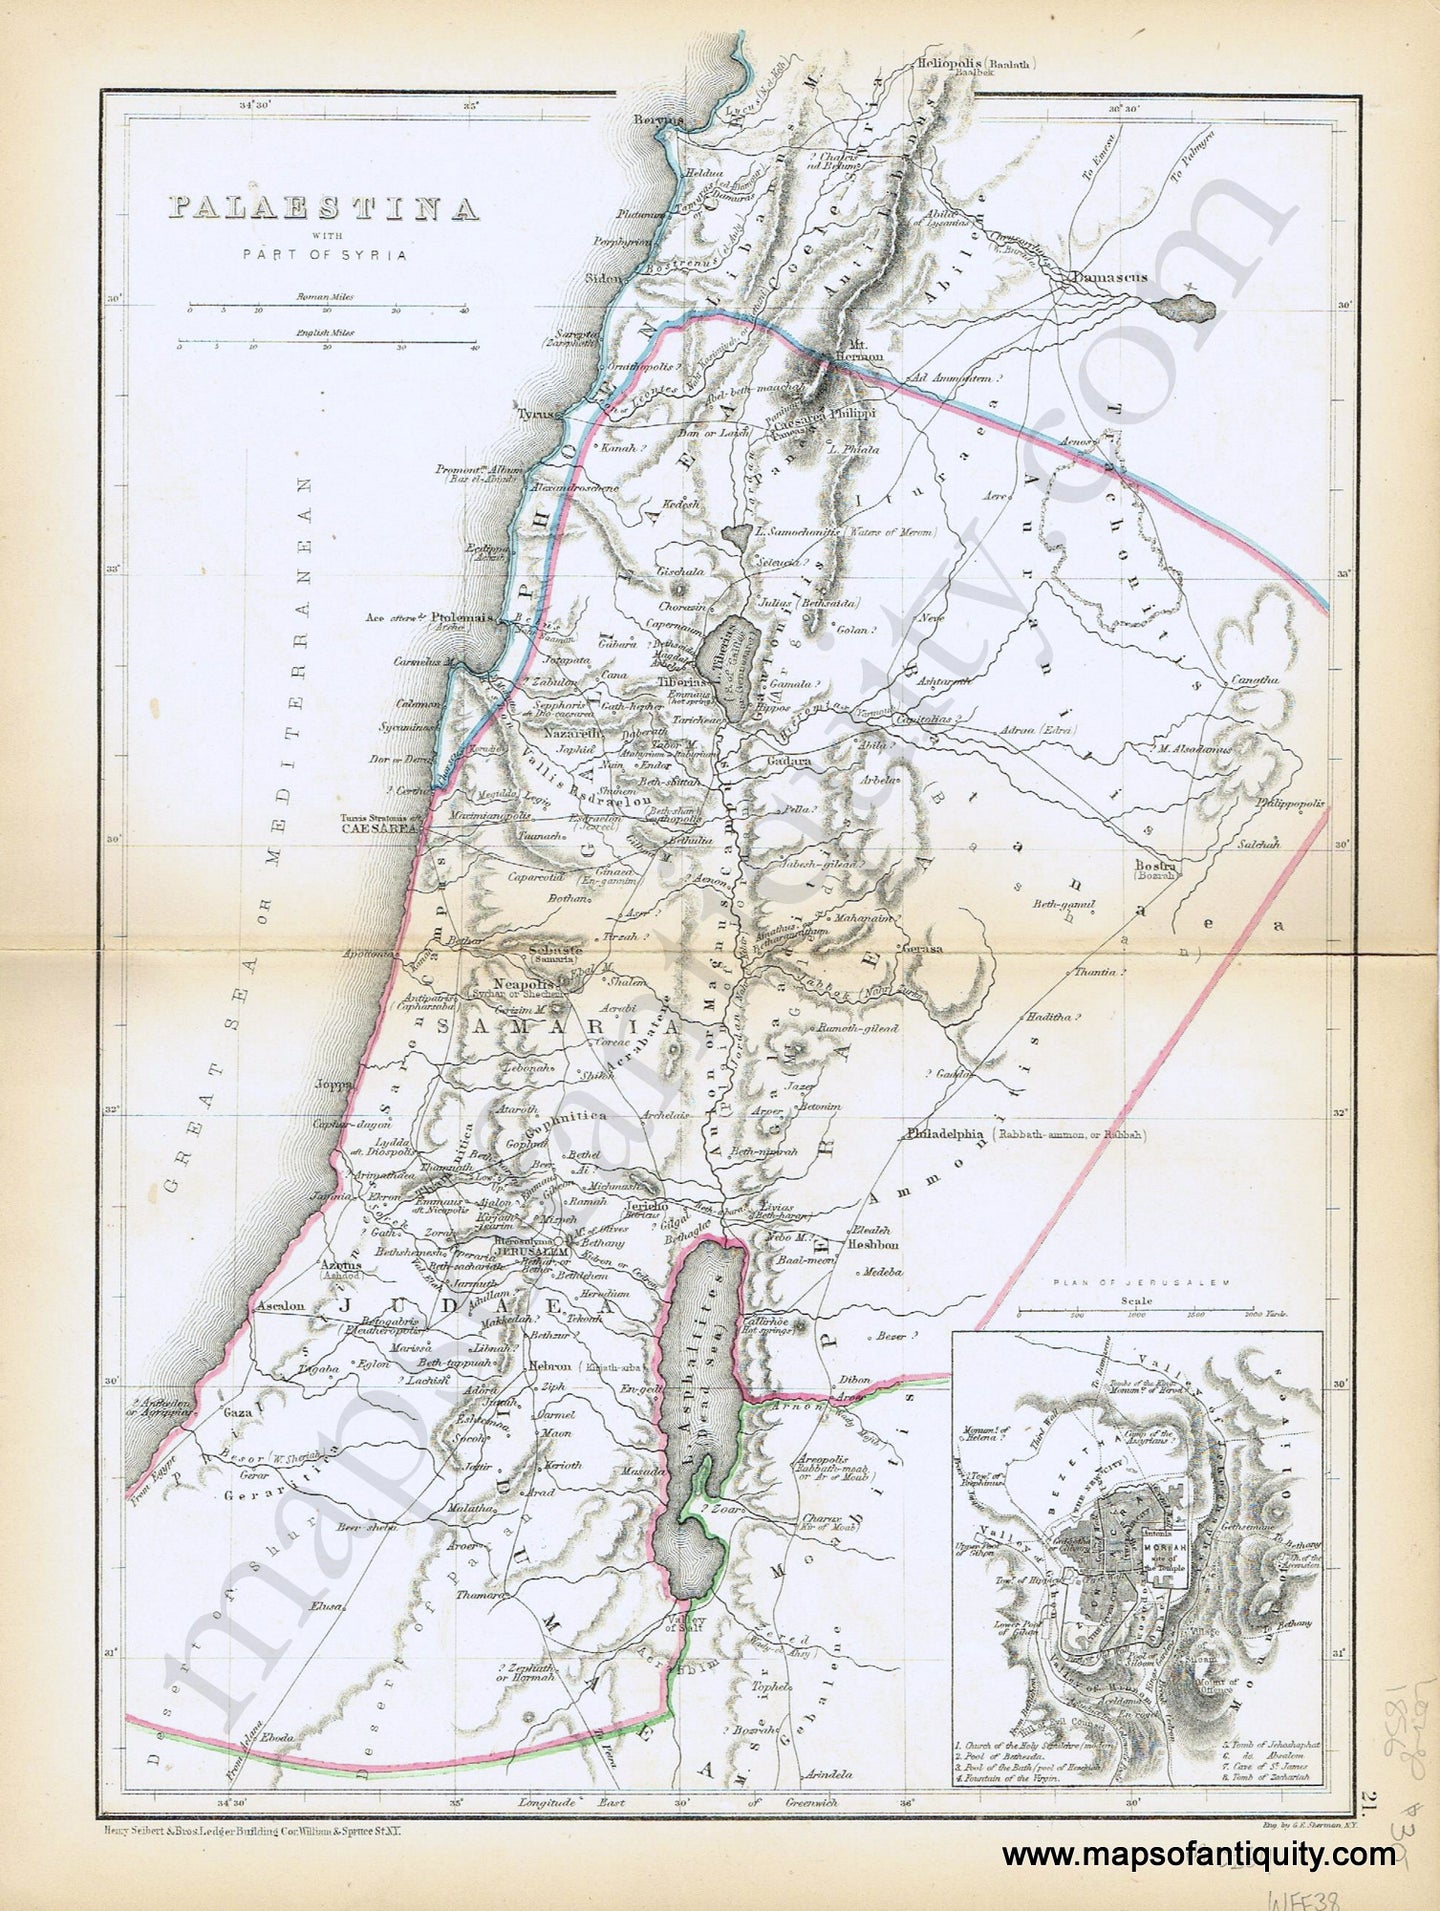 Antique-Hand-Colored-Map-Palestina-with-Part-of-Syria-Middle-East-&-Holy-Land--1856-Long-Maps-Of-Antiquity